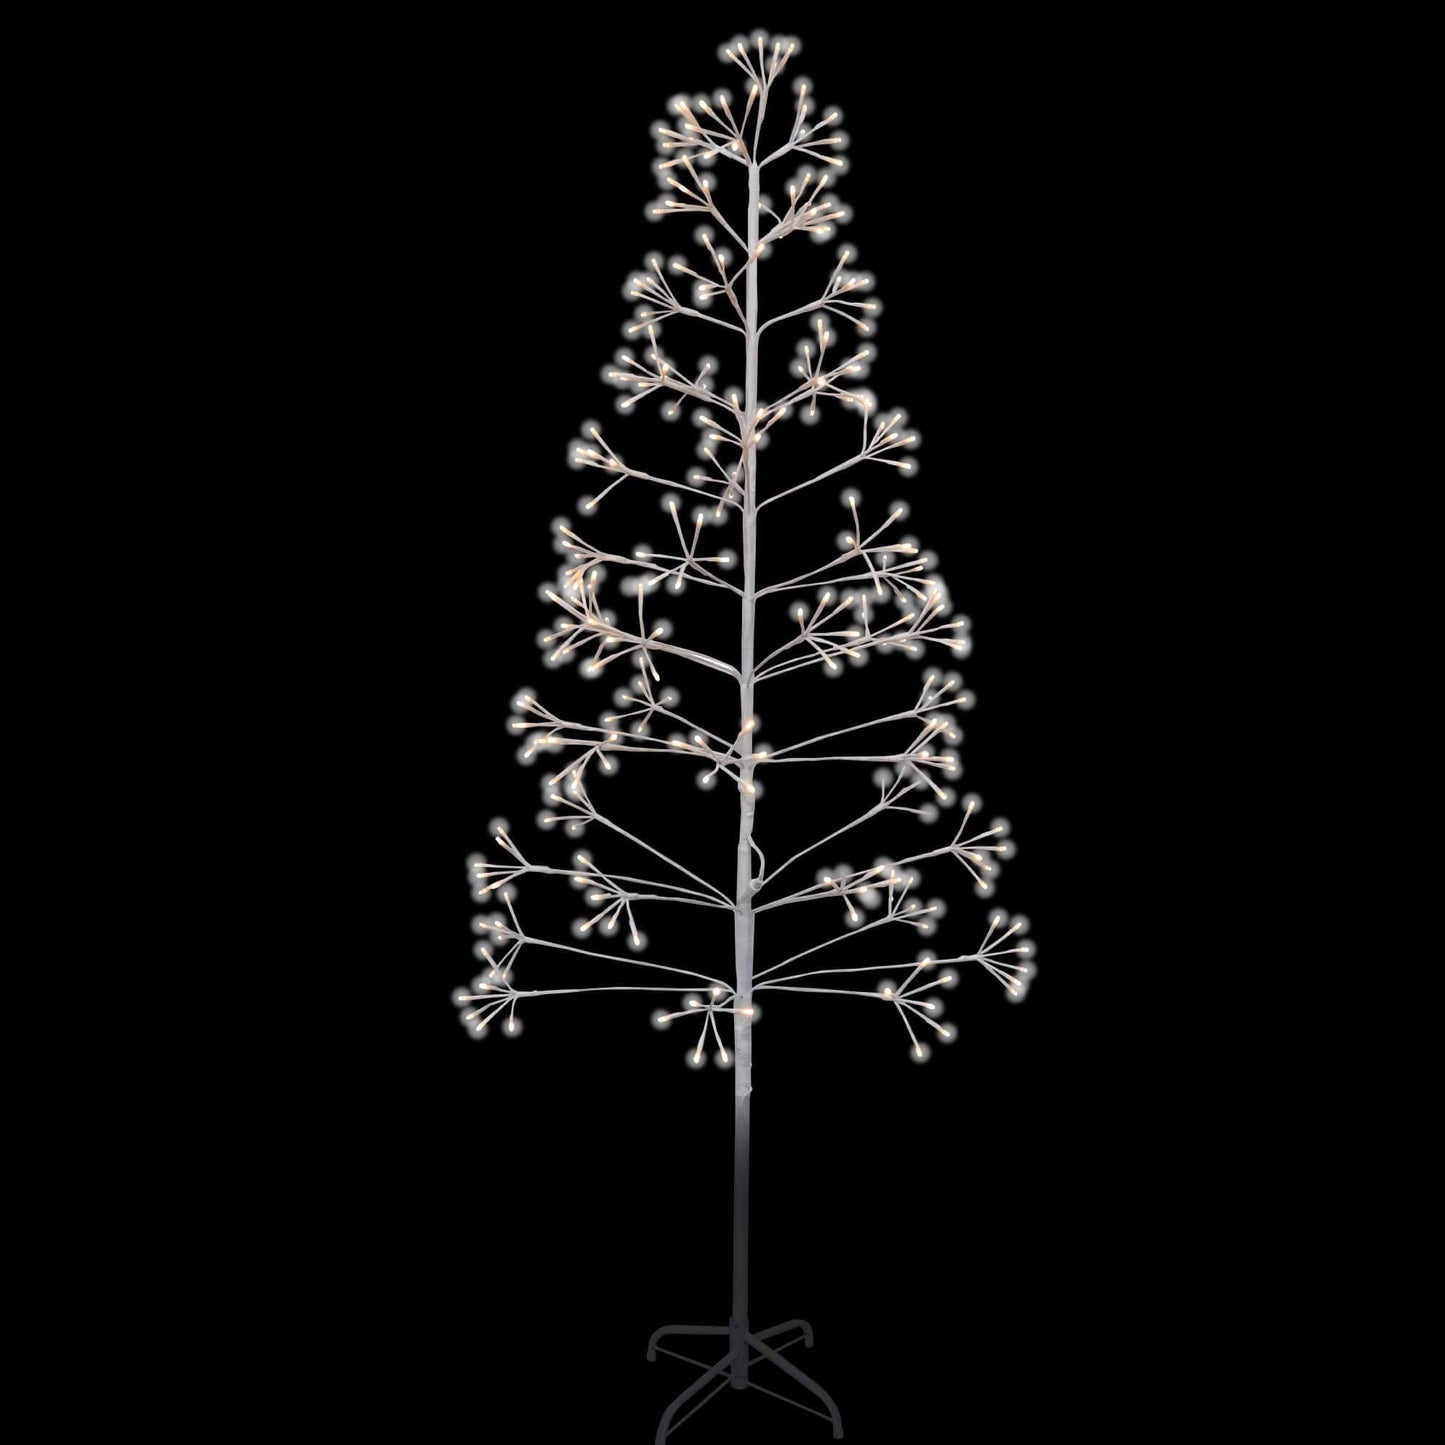 6ft LED Starburst Christmas Tree with Pre Lit warm white lighting functions